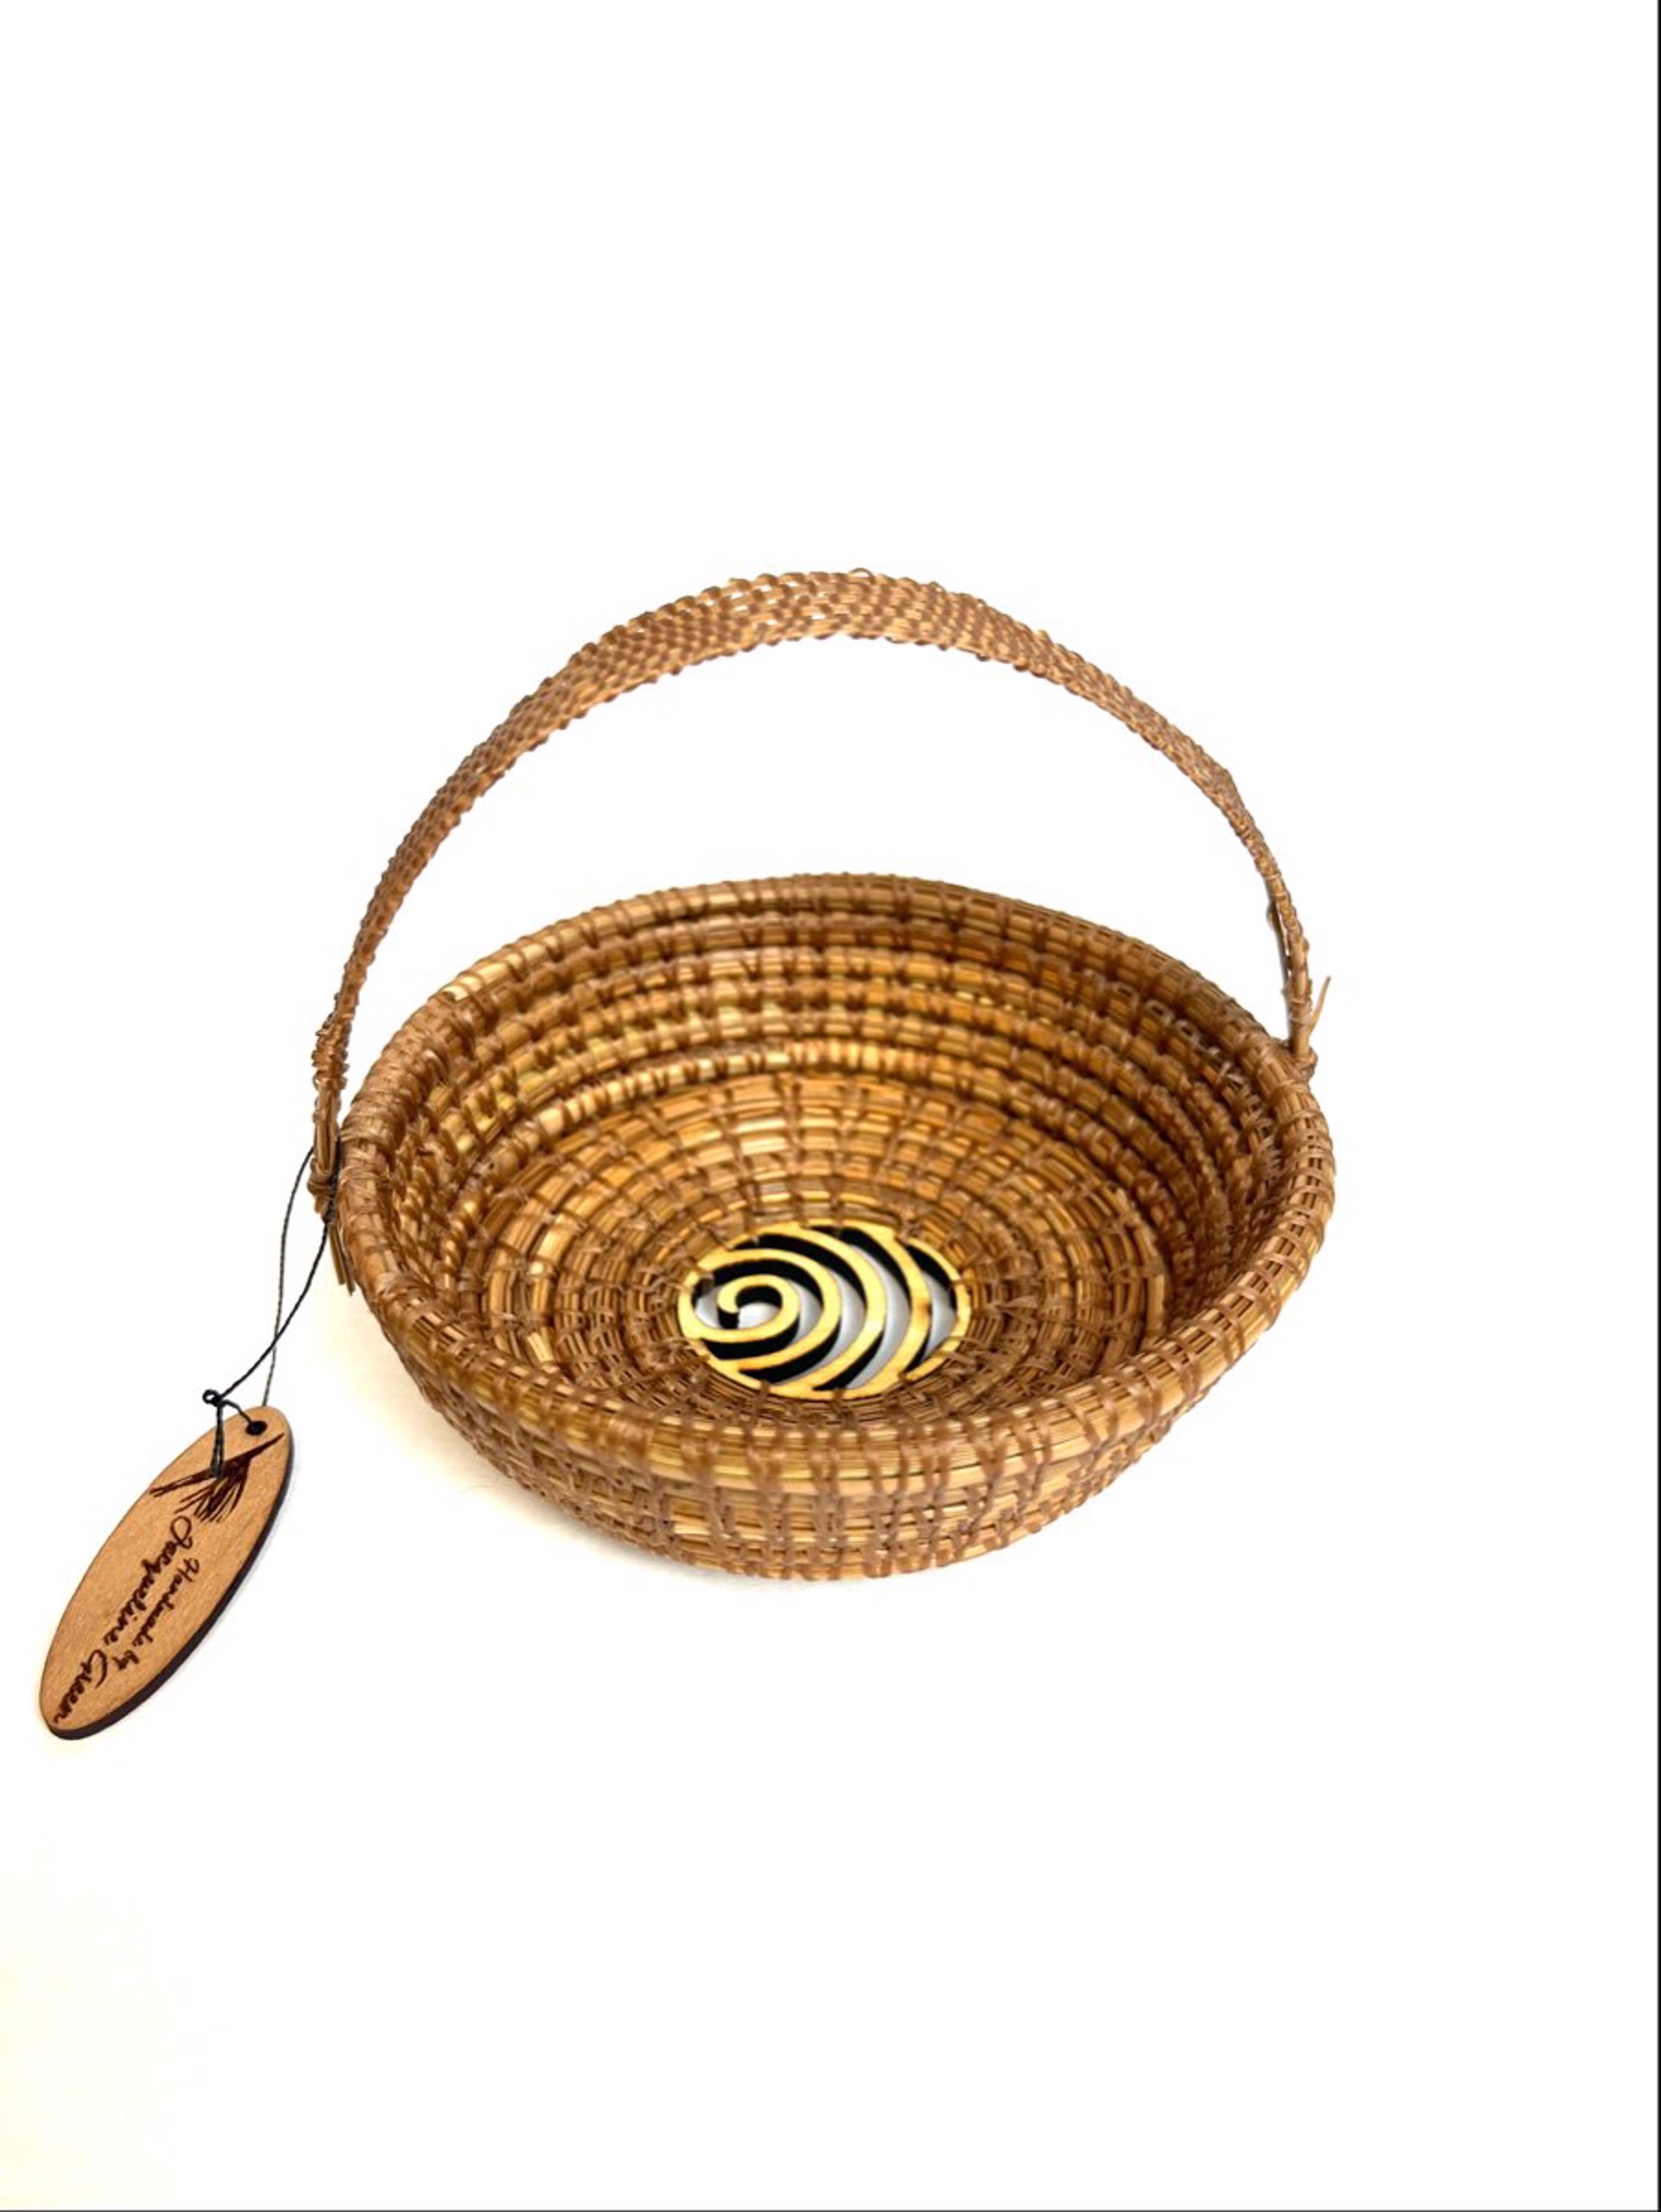 Basket with Swirl Center and Woven Handle by Jacqueline Green